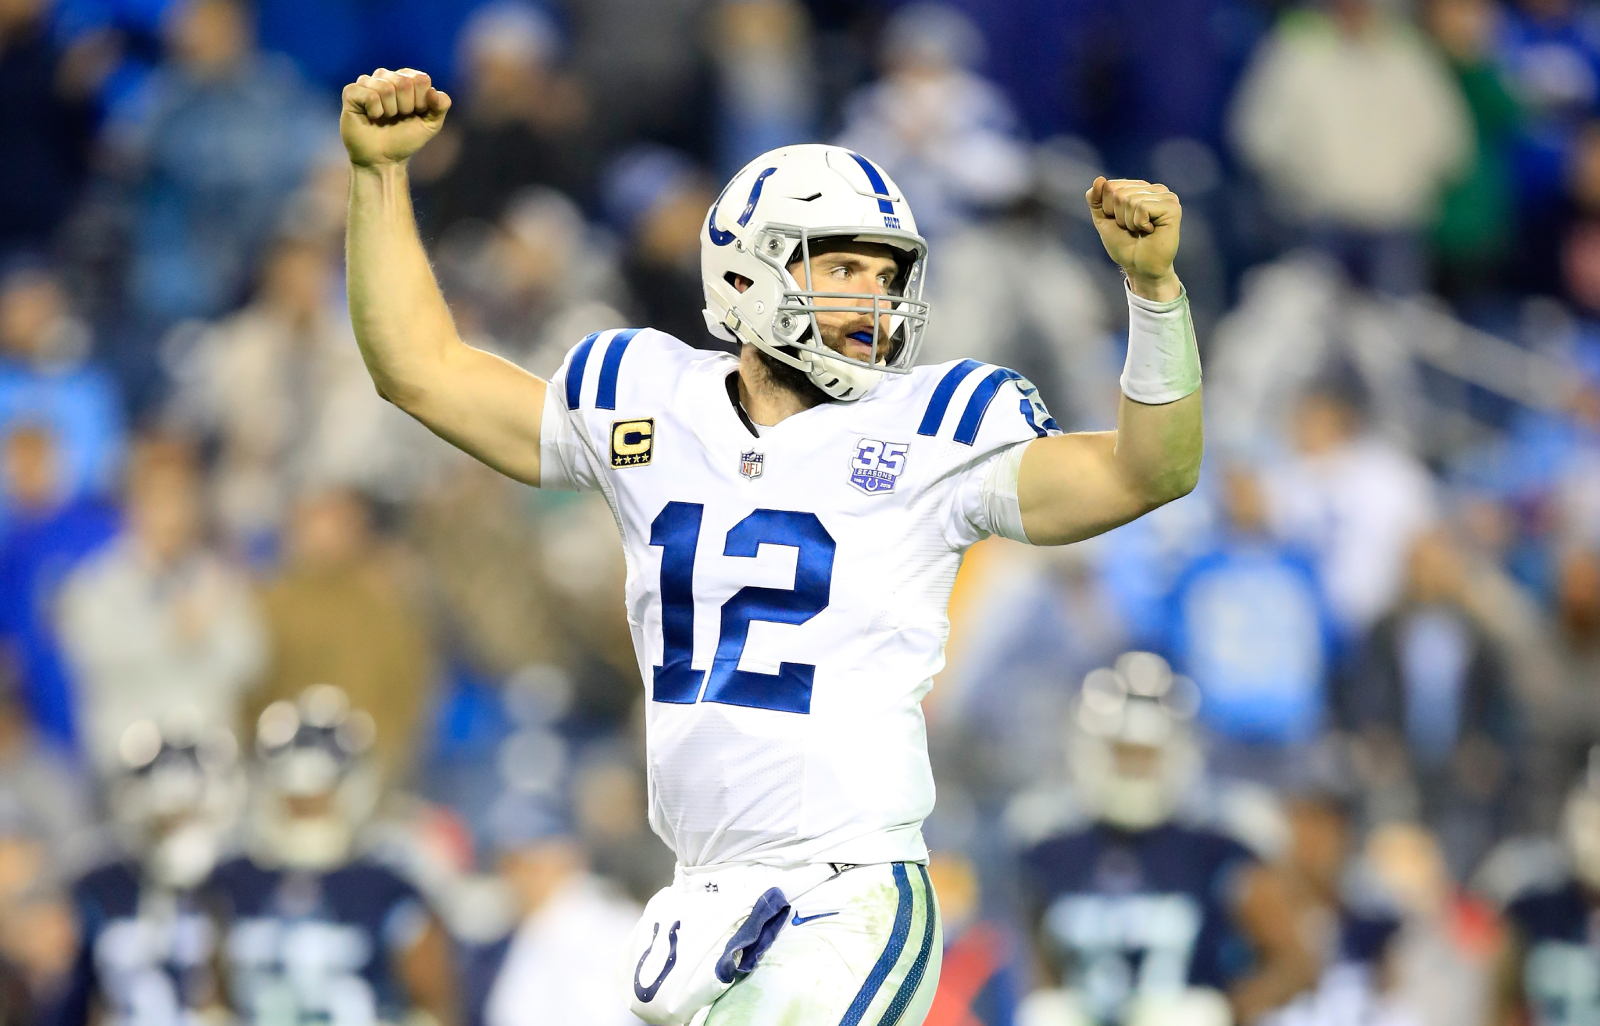 Former Indianapolis Colts quarterback Andrew Luck shocked everyone when he retired from football. Does he keep in contact with the Colts?